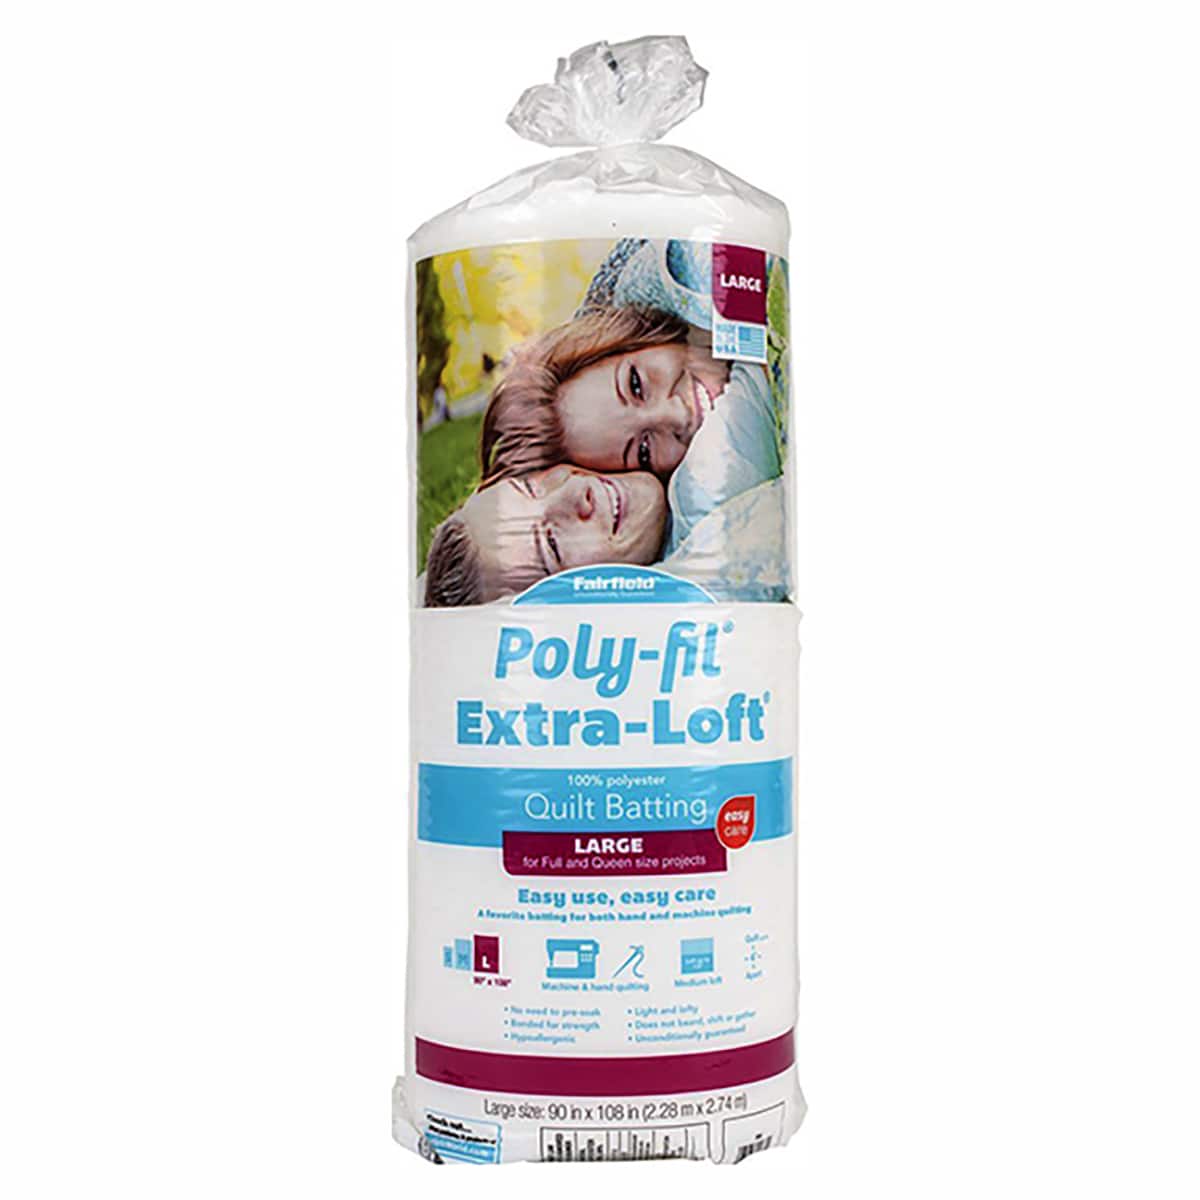 Poly-Fil Hi-Loft Bonded Polyester Quilt Batting-Queen size, Size: 90 inch x 108 inch